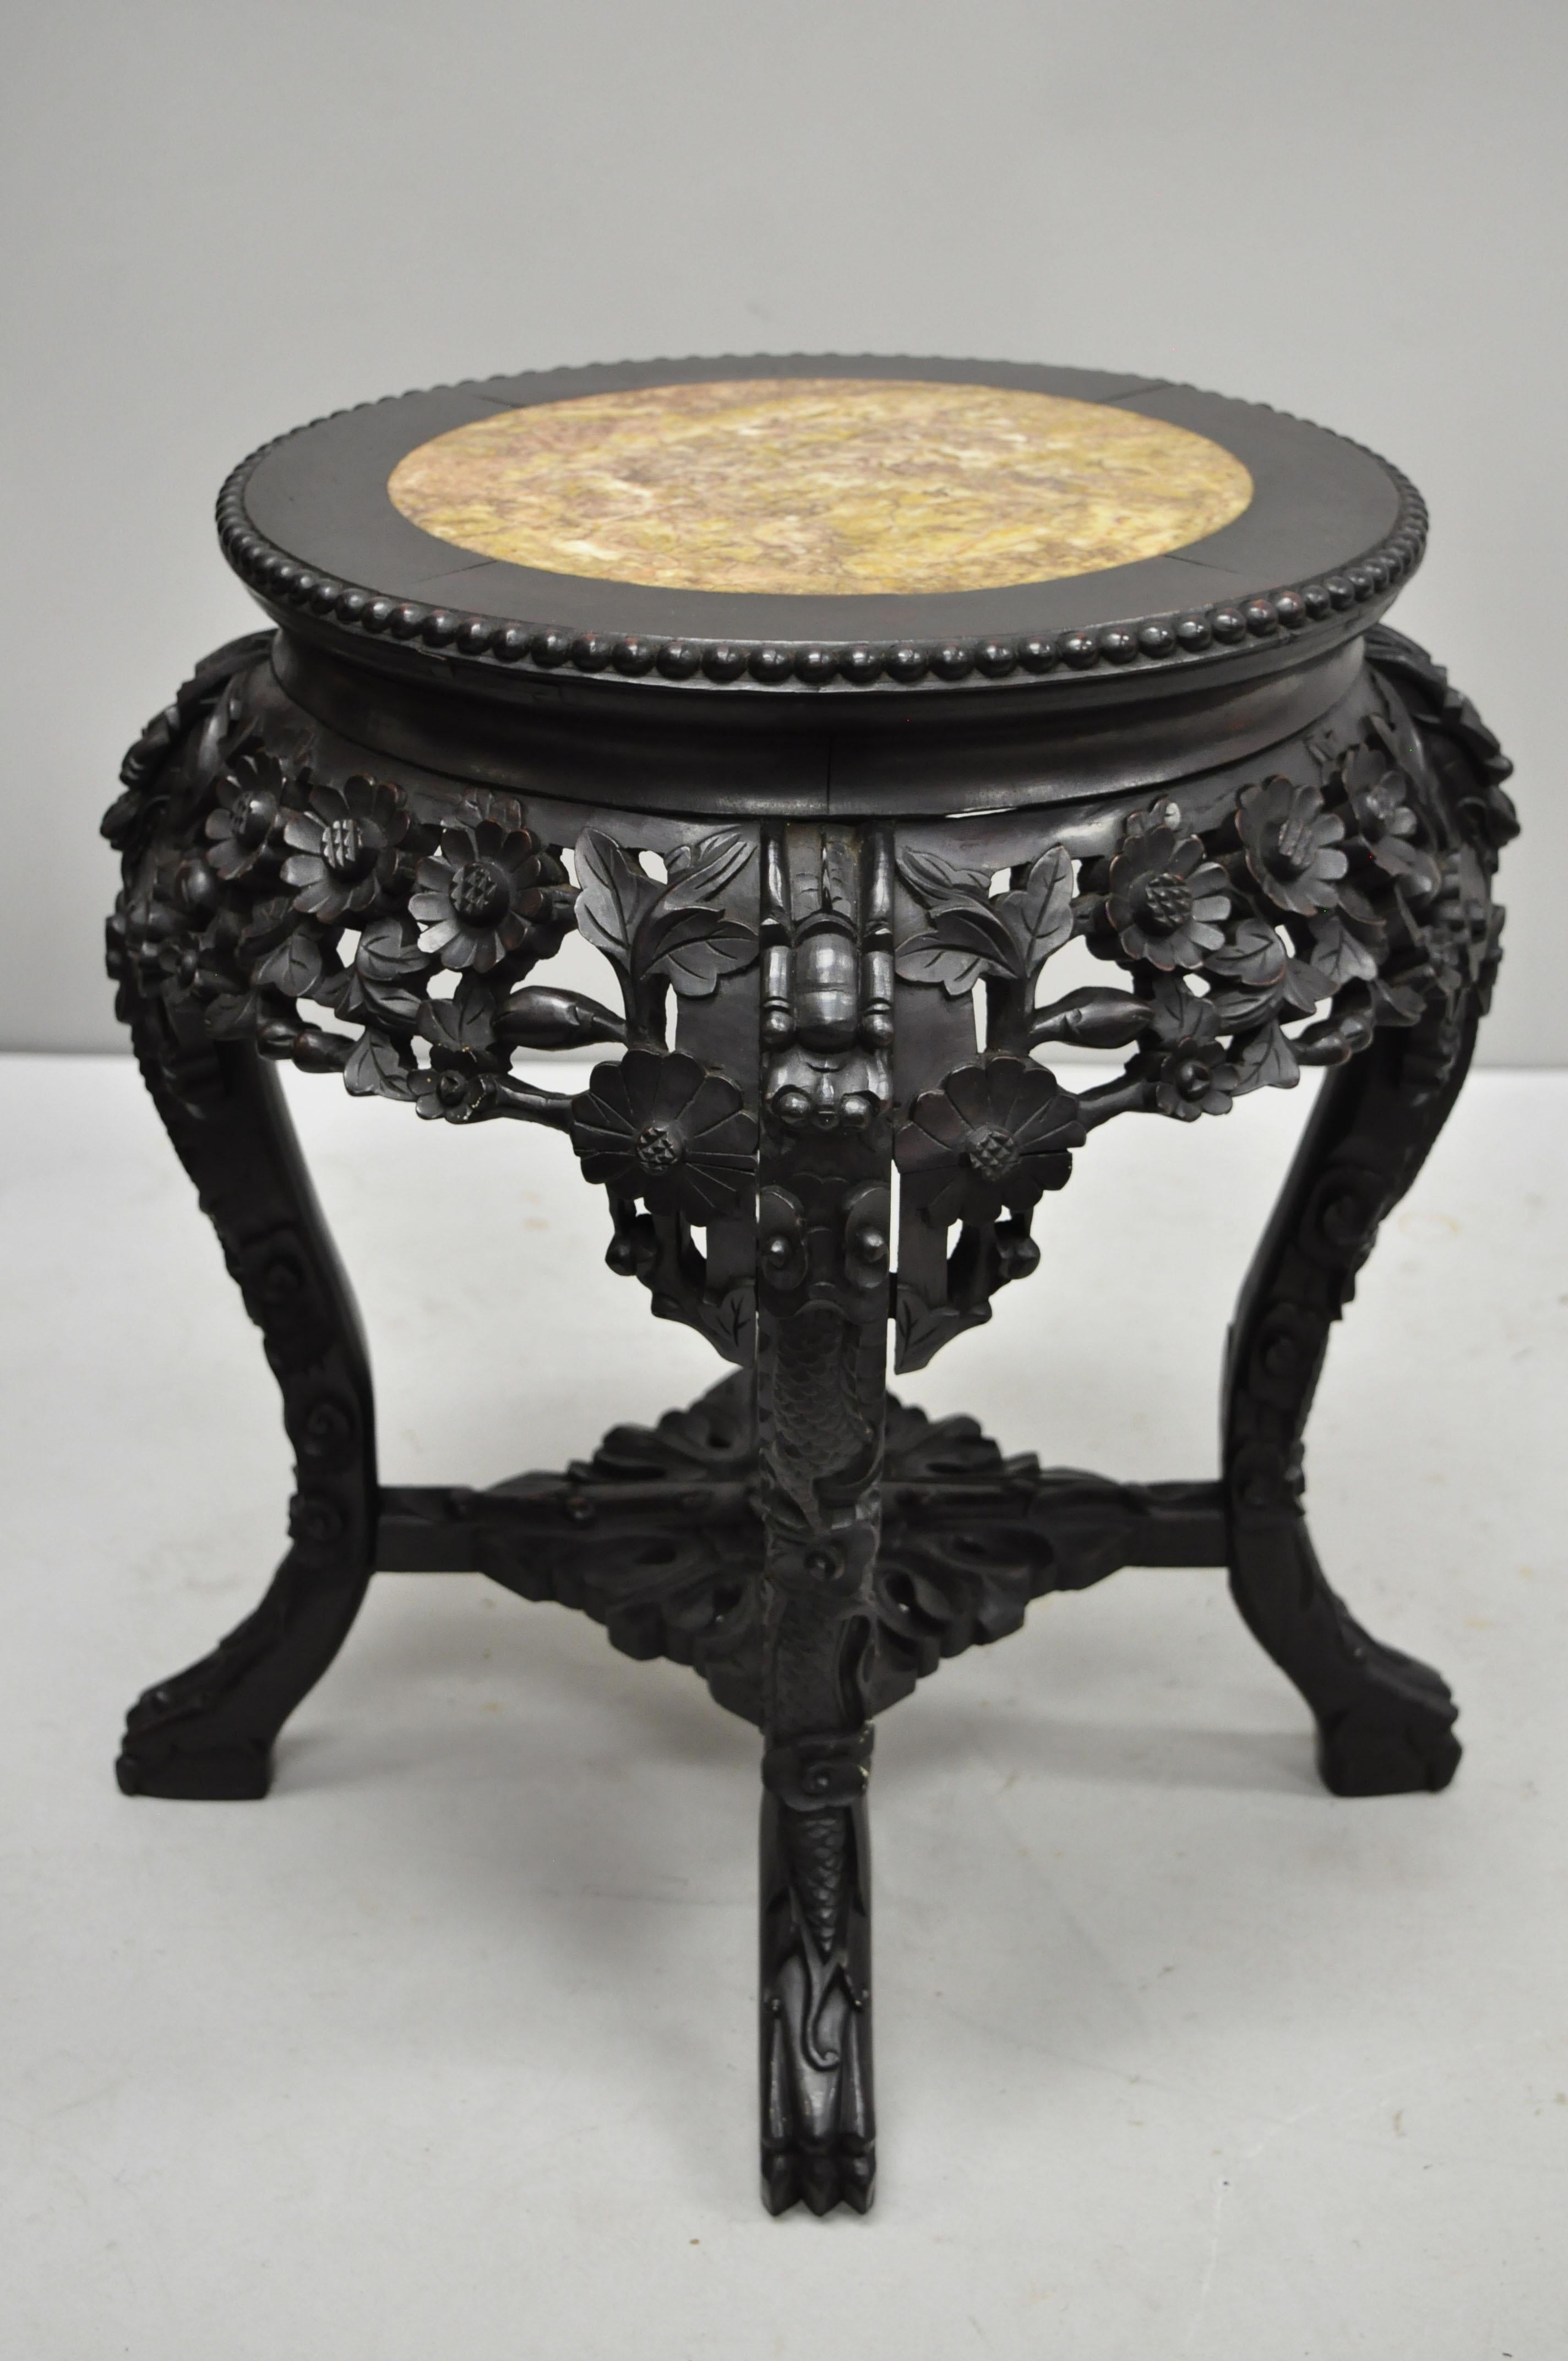 Antique Carved Hardwood Rosewood and Marble Top Chinese Pedestal Table (A). Item features inset marble top, pierce carved floral skirt, carved stretcher base, solid wood construction, finely carved details, very nice antique item. Circa Late 19th to